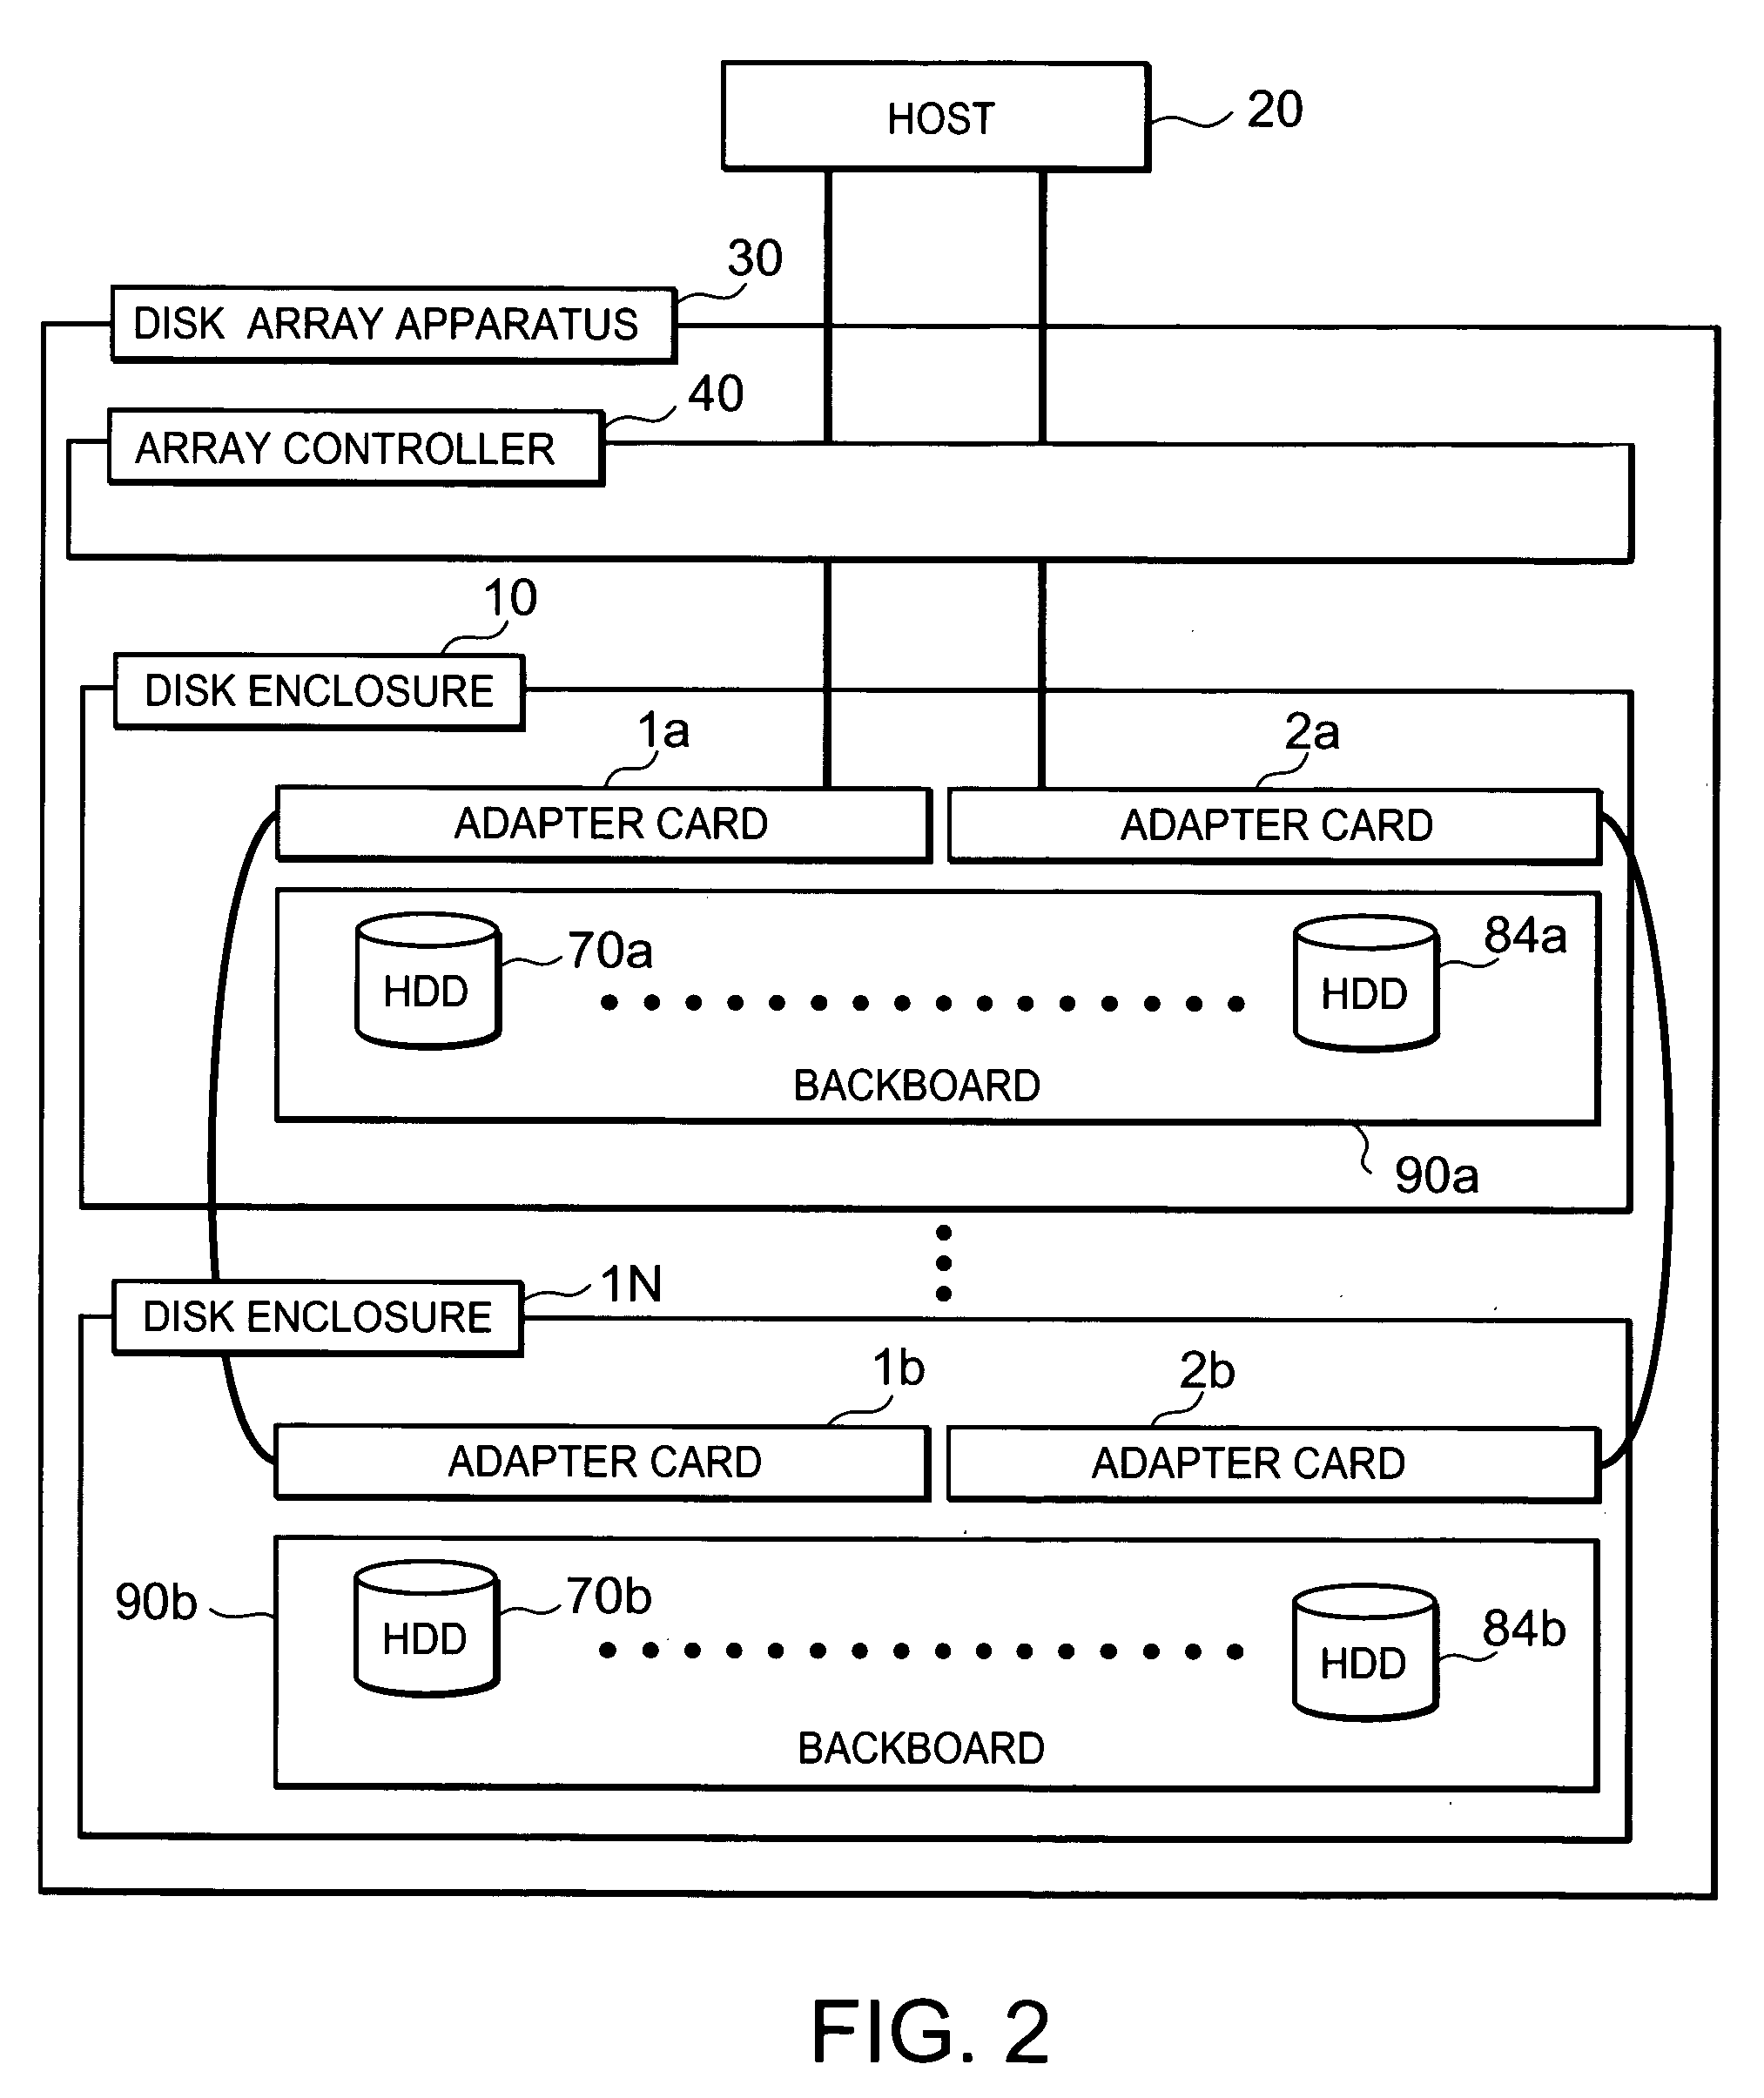 Controller for a disk, disk enclosure device, disk array apparatus, method for detecting a fault of disk enclosure device, and signal-bearing medium